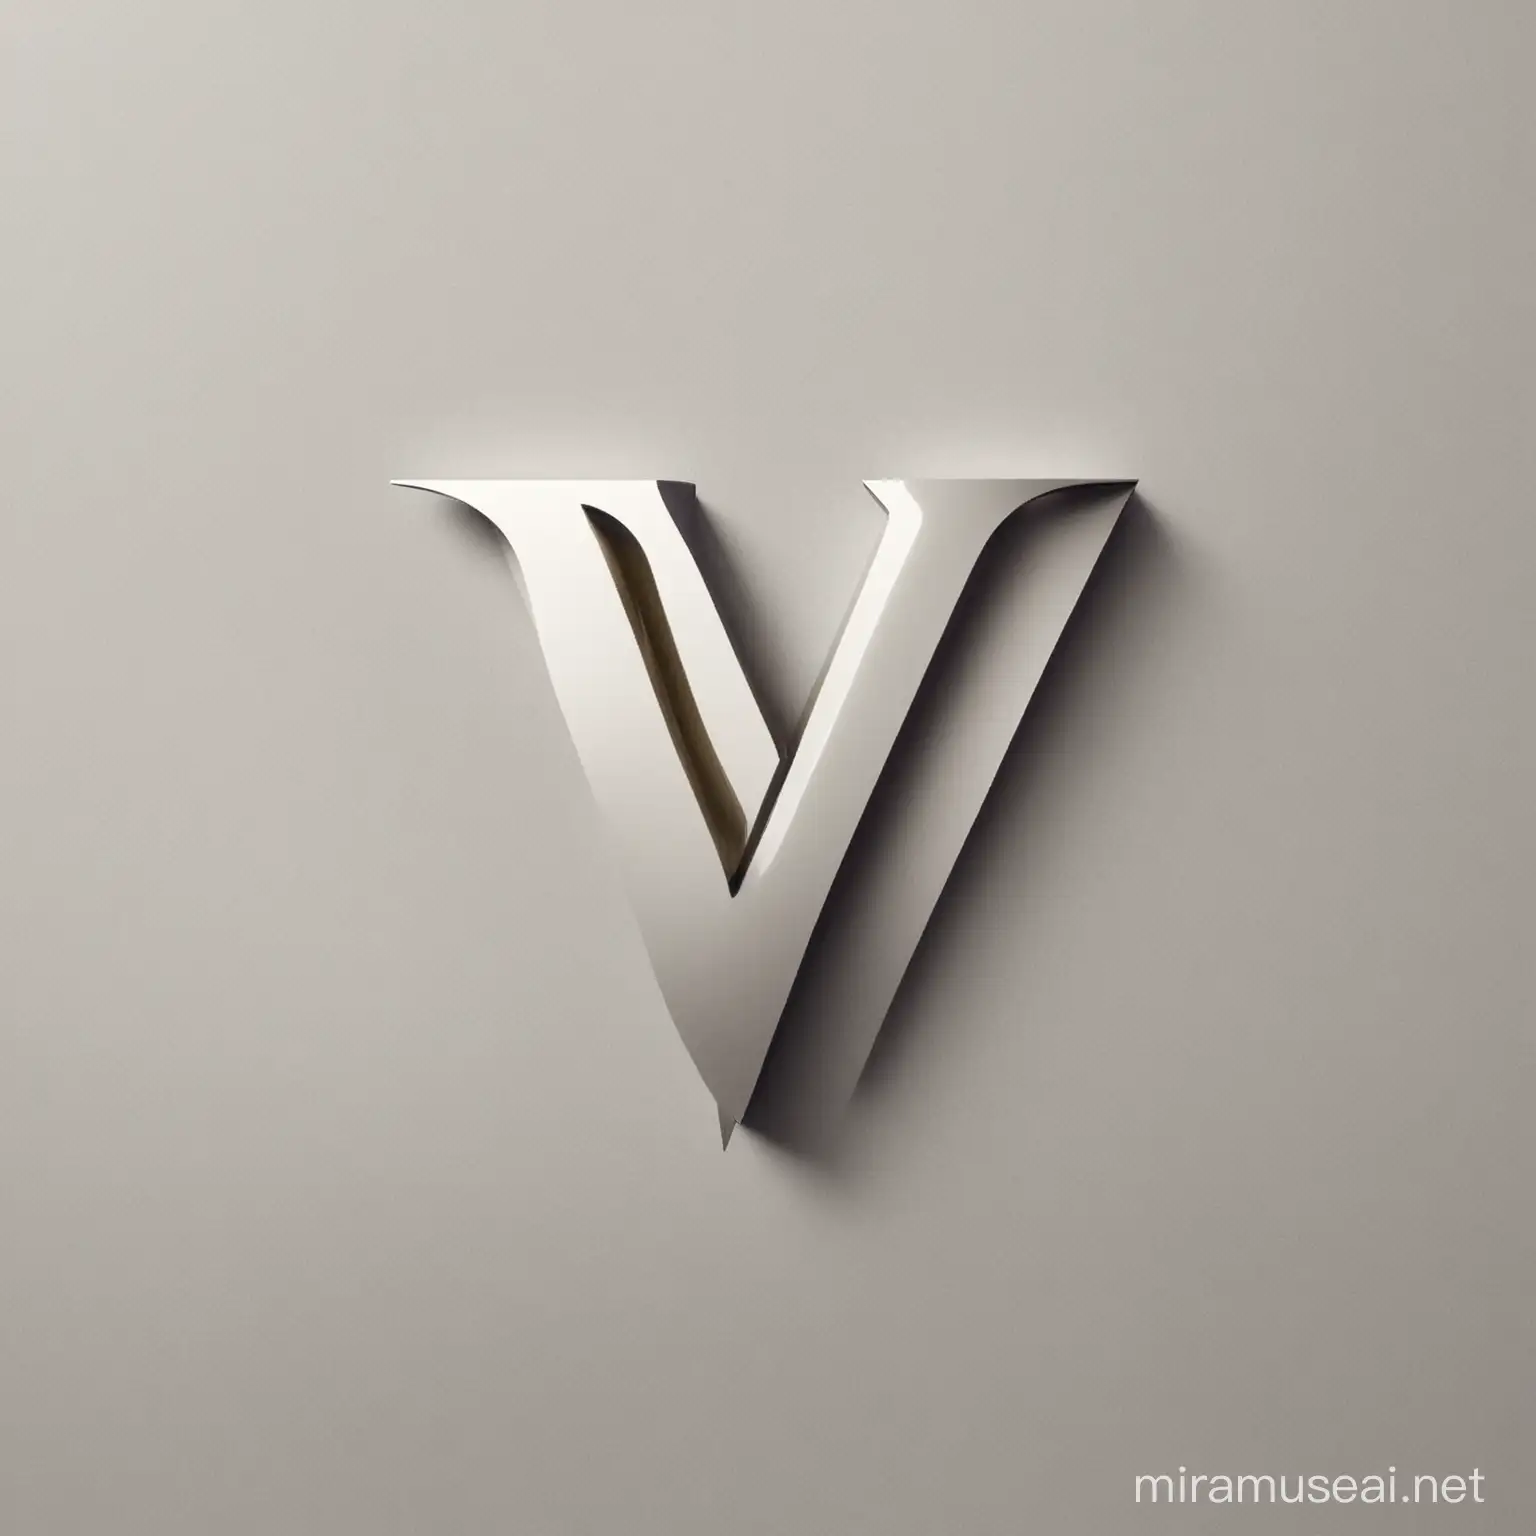 A company logo with the letter “V”

